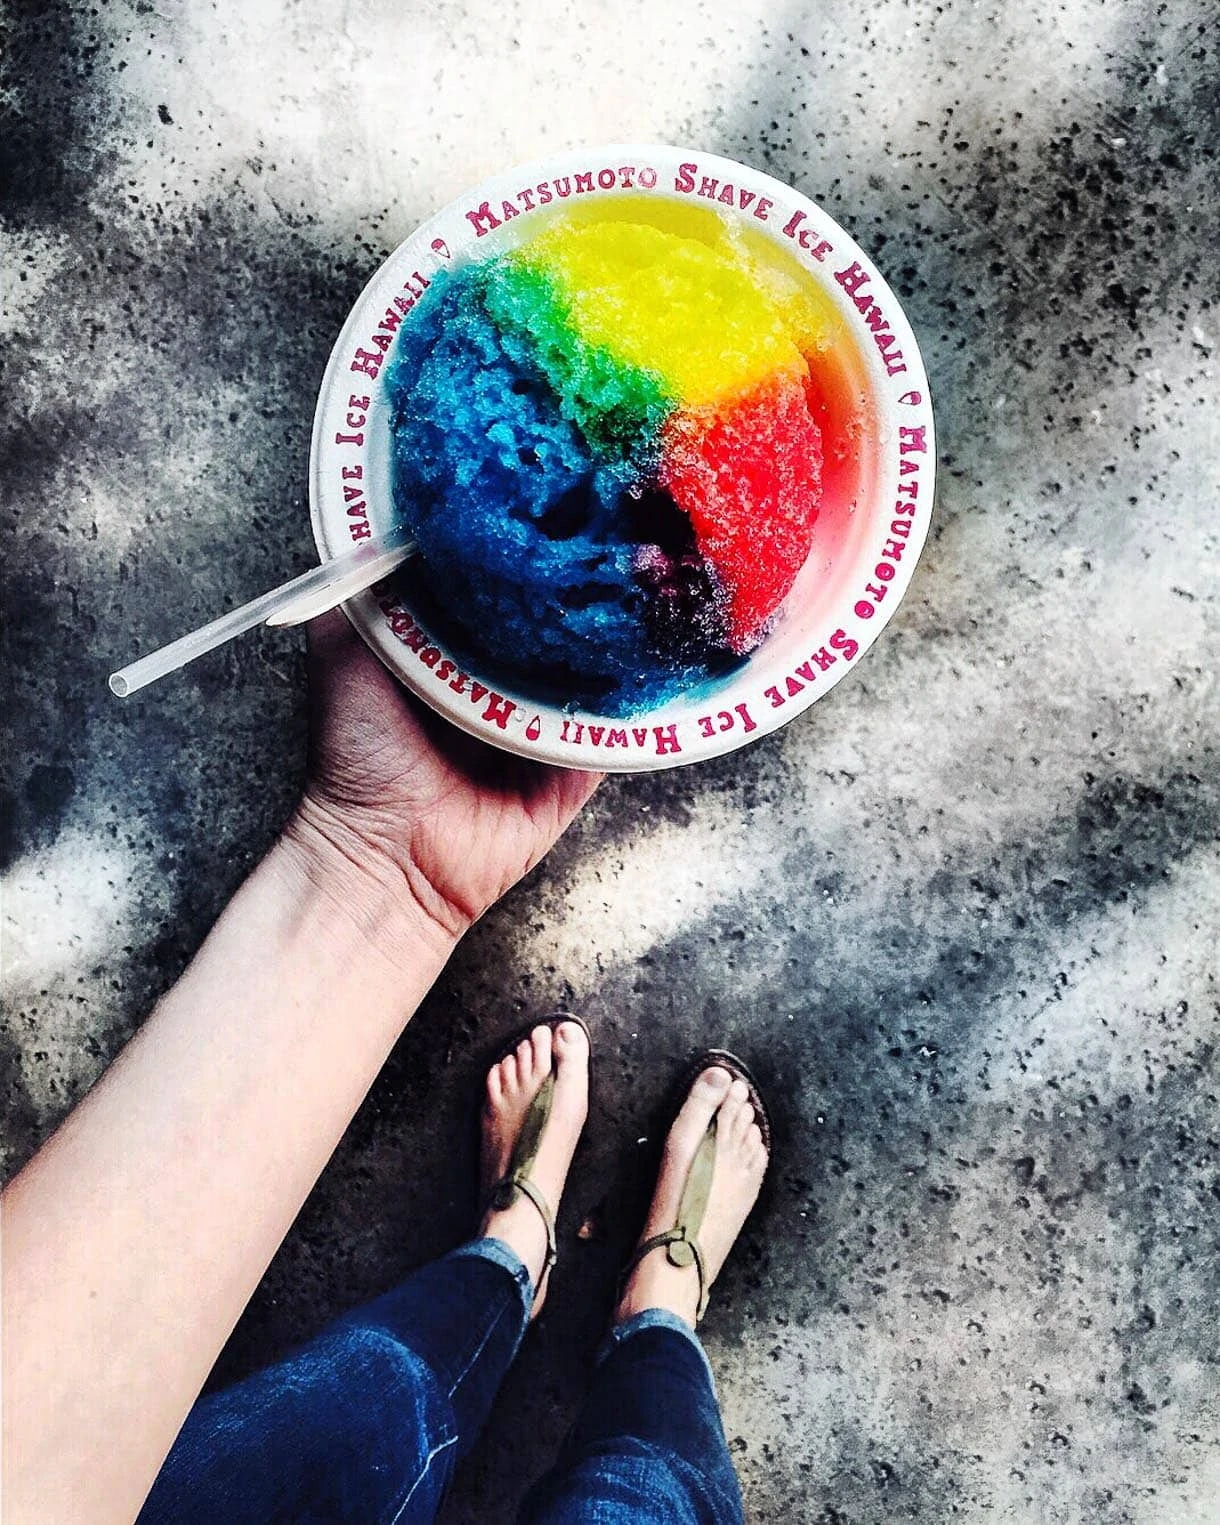 10 Best Local Spots to Eat in Oahu -- Matsumoto's Shaved Ice